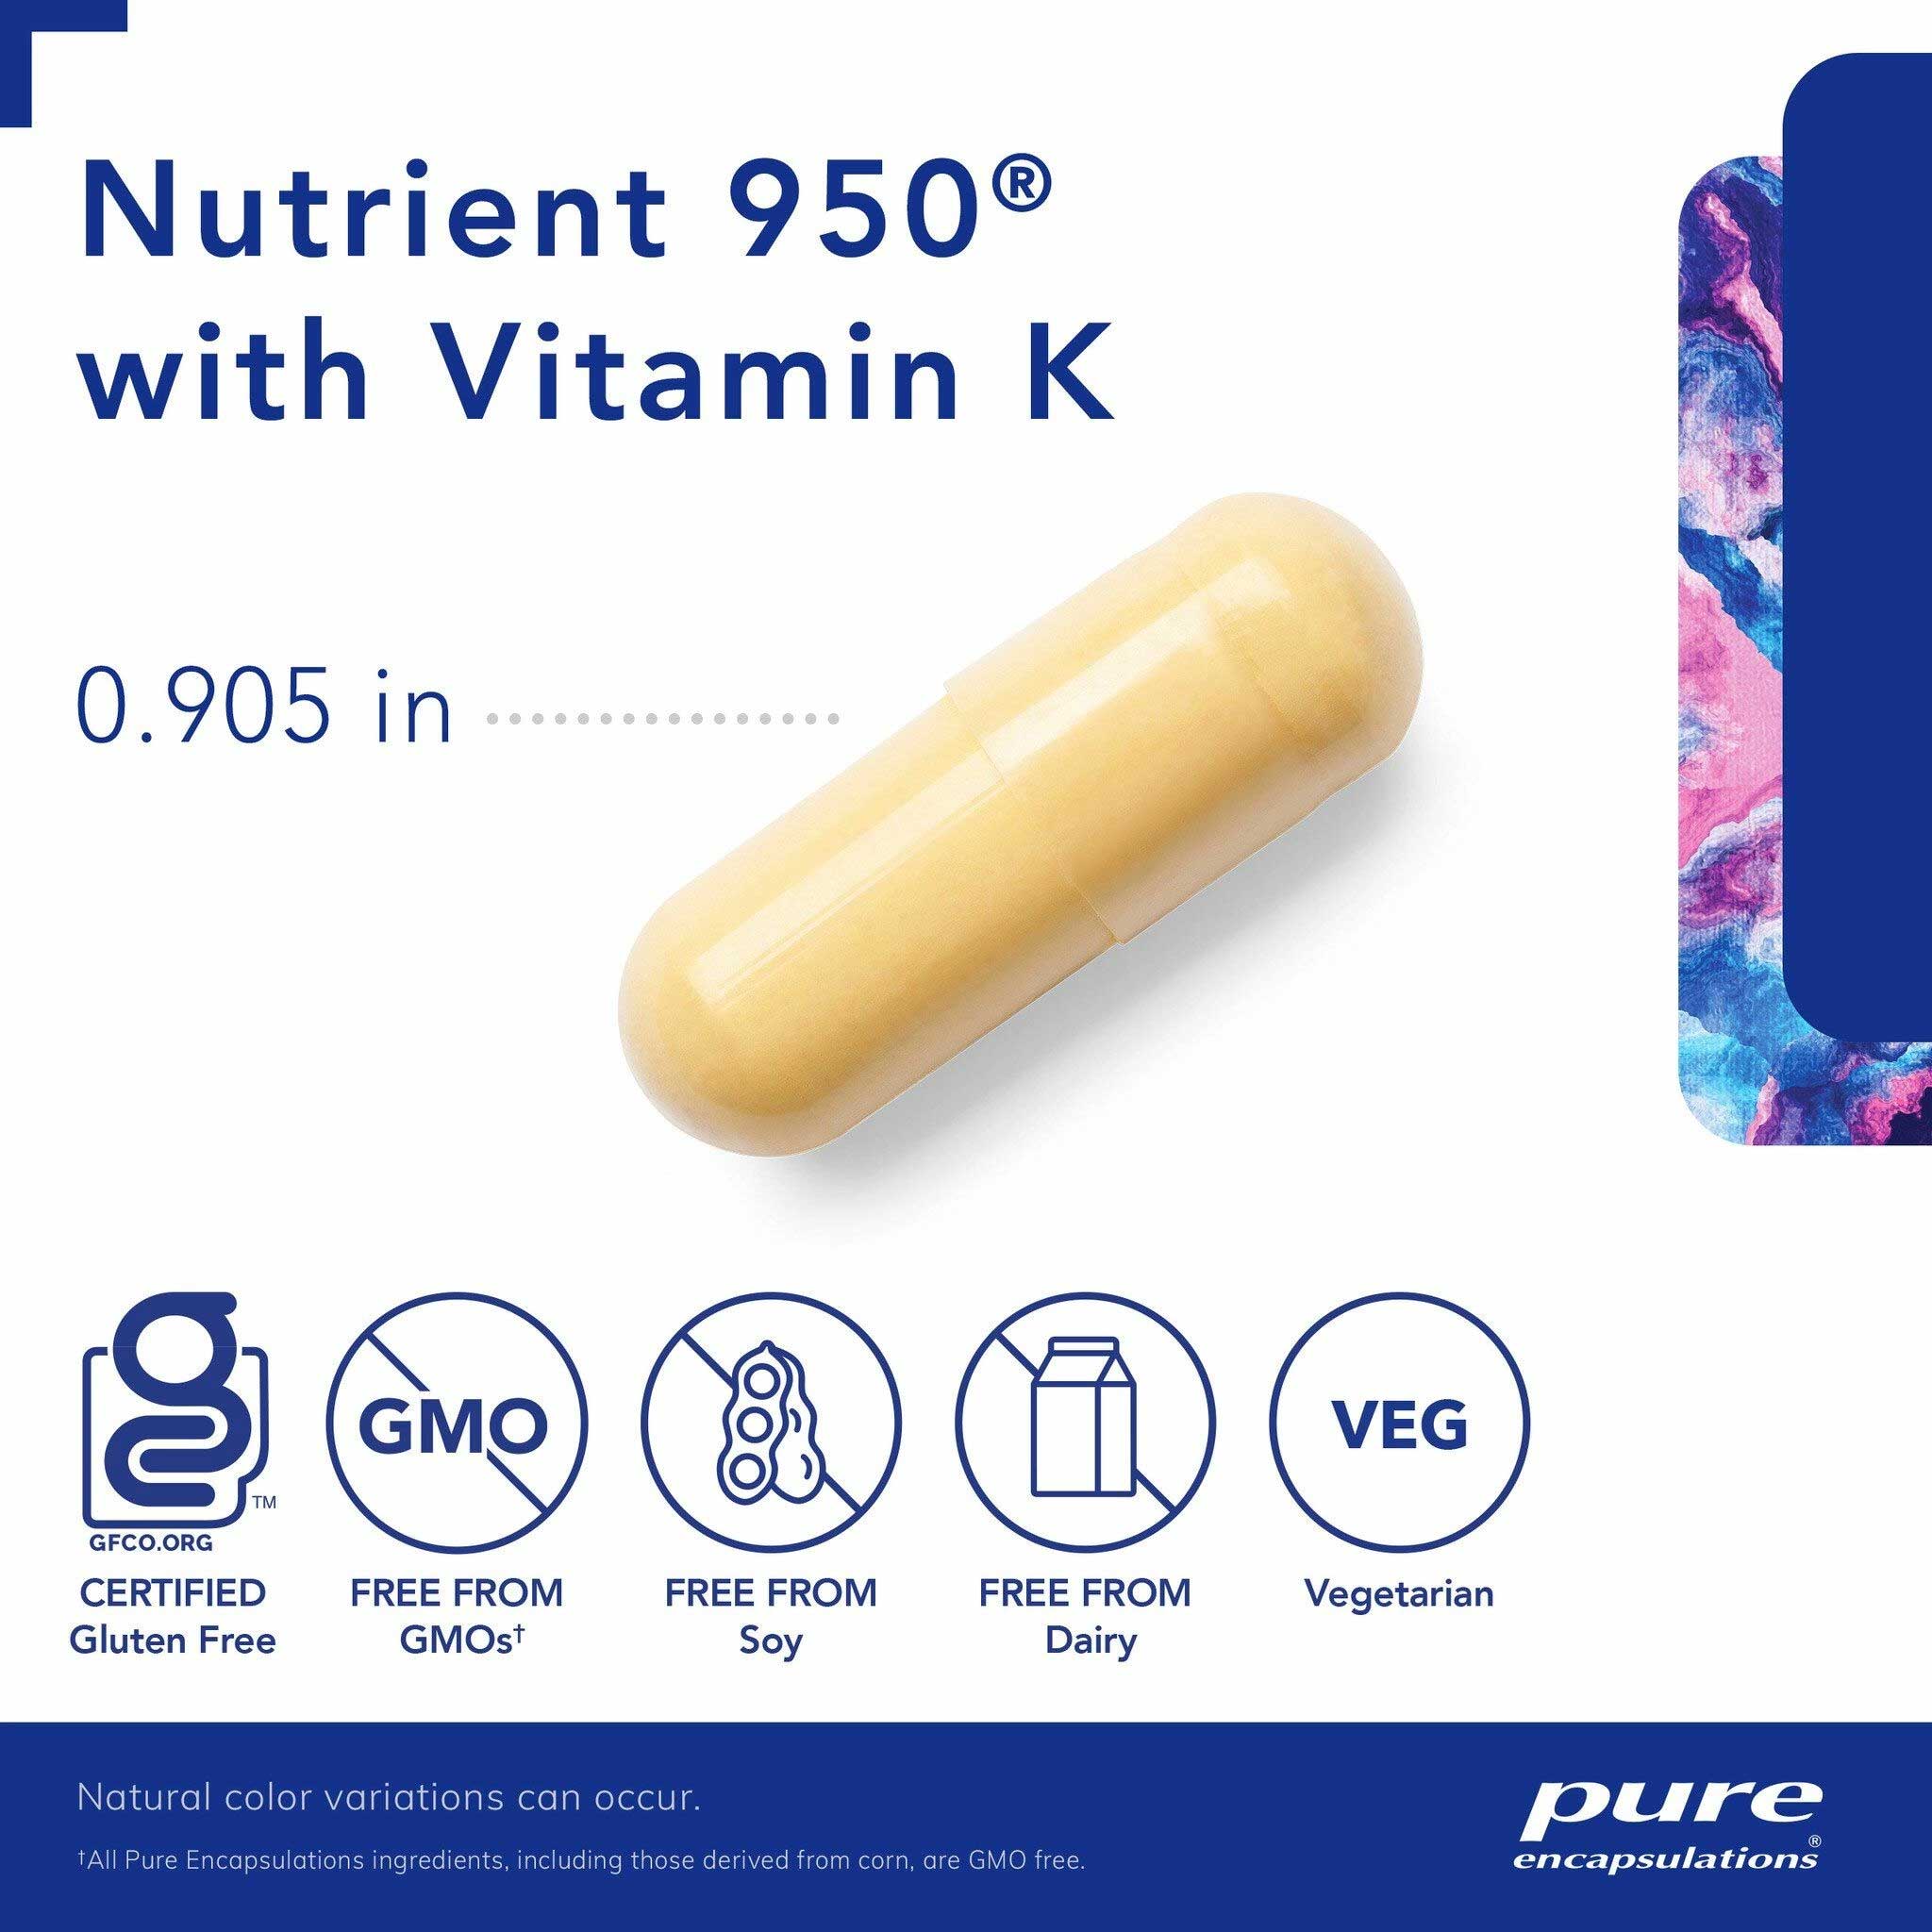 Pure Encapsulations Nutrient 950 with Vitamin K